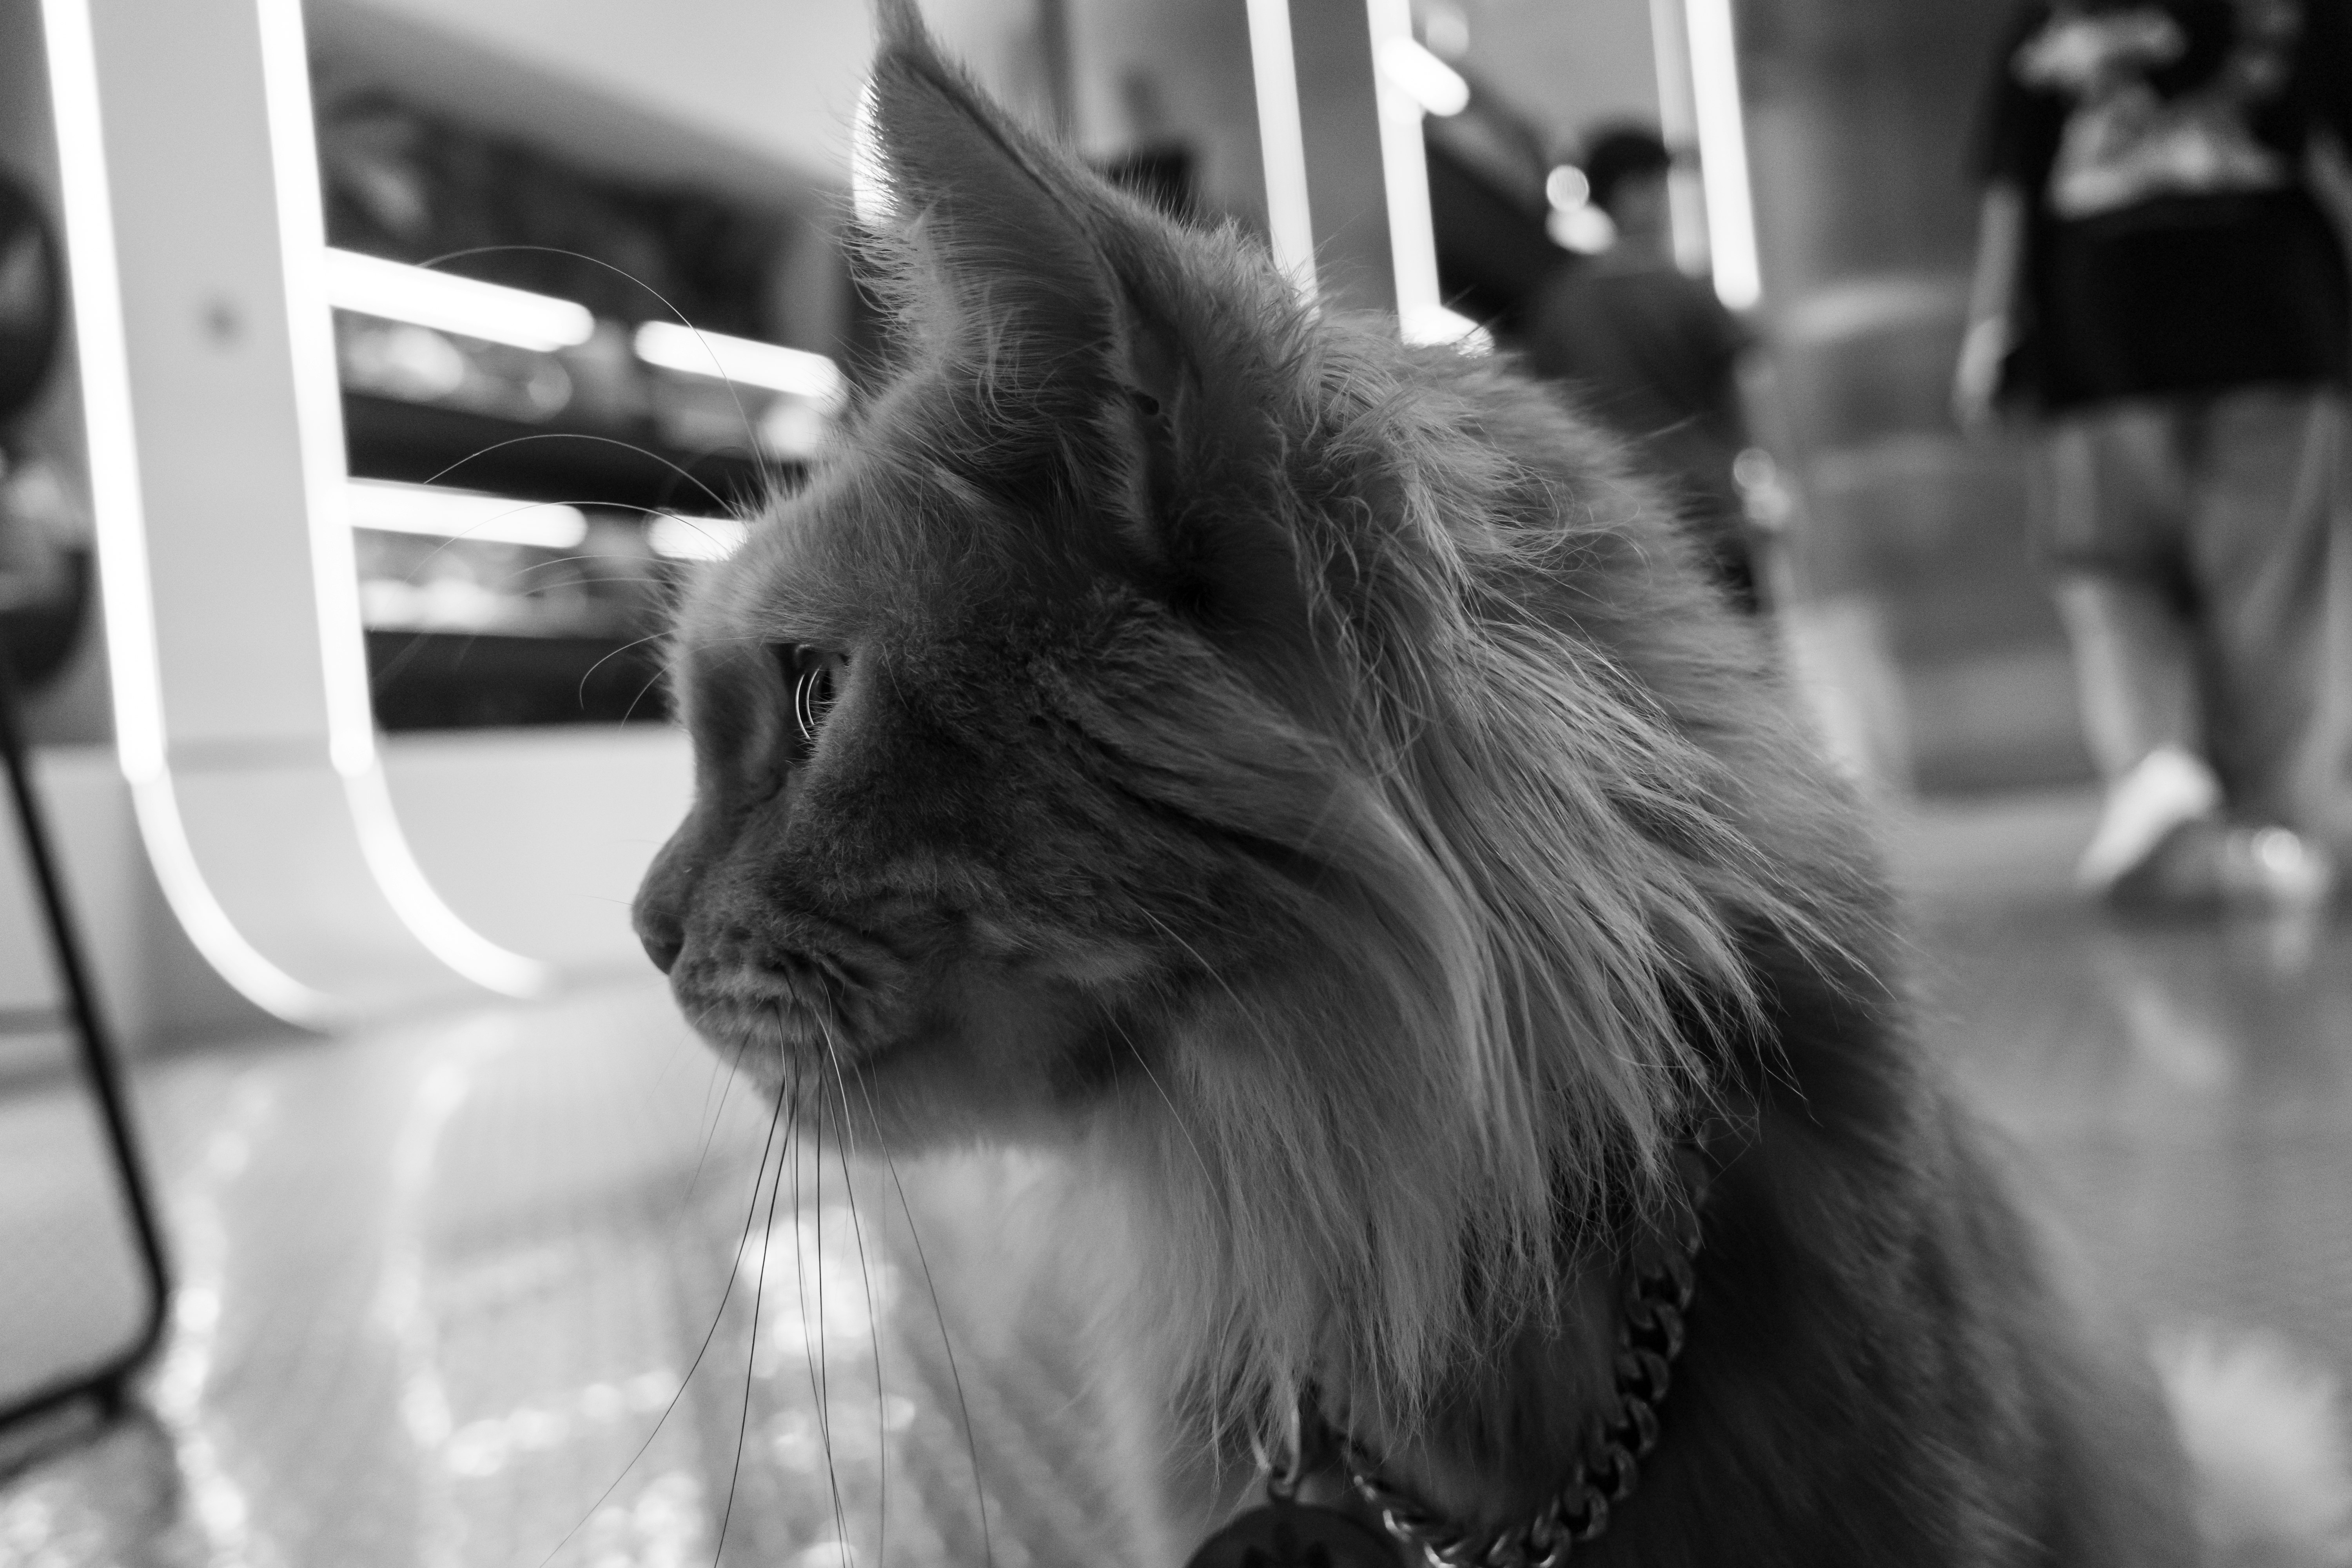 grayscale photo of long fur cat